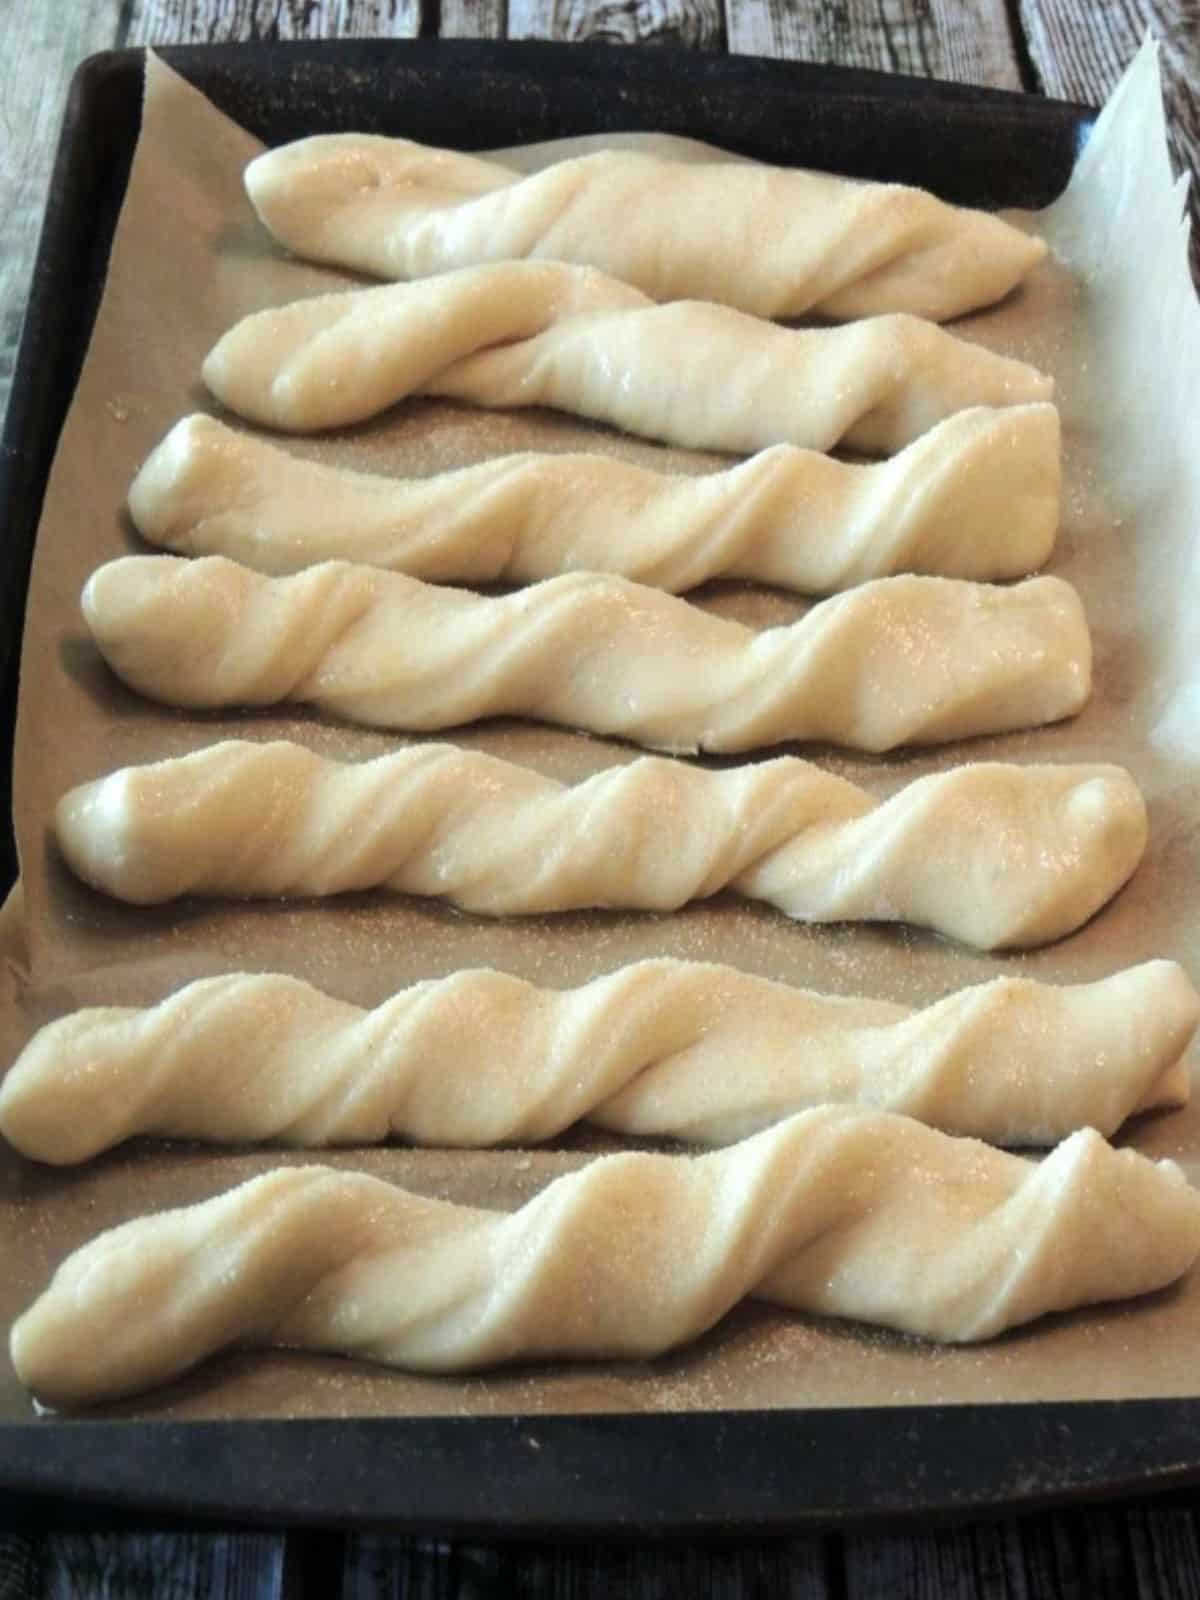 twisted breadsticks on baking tray before baking.